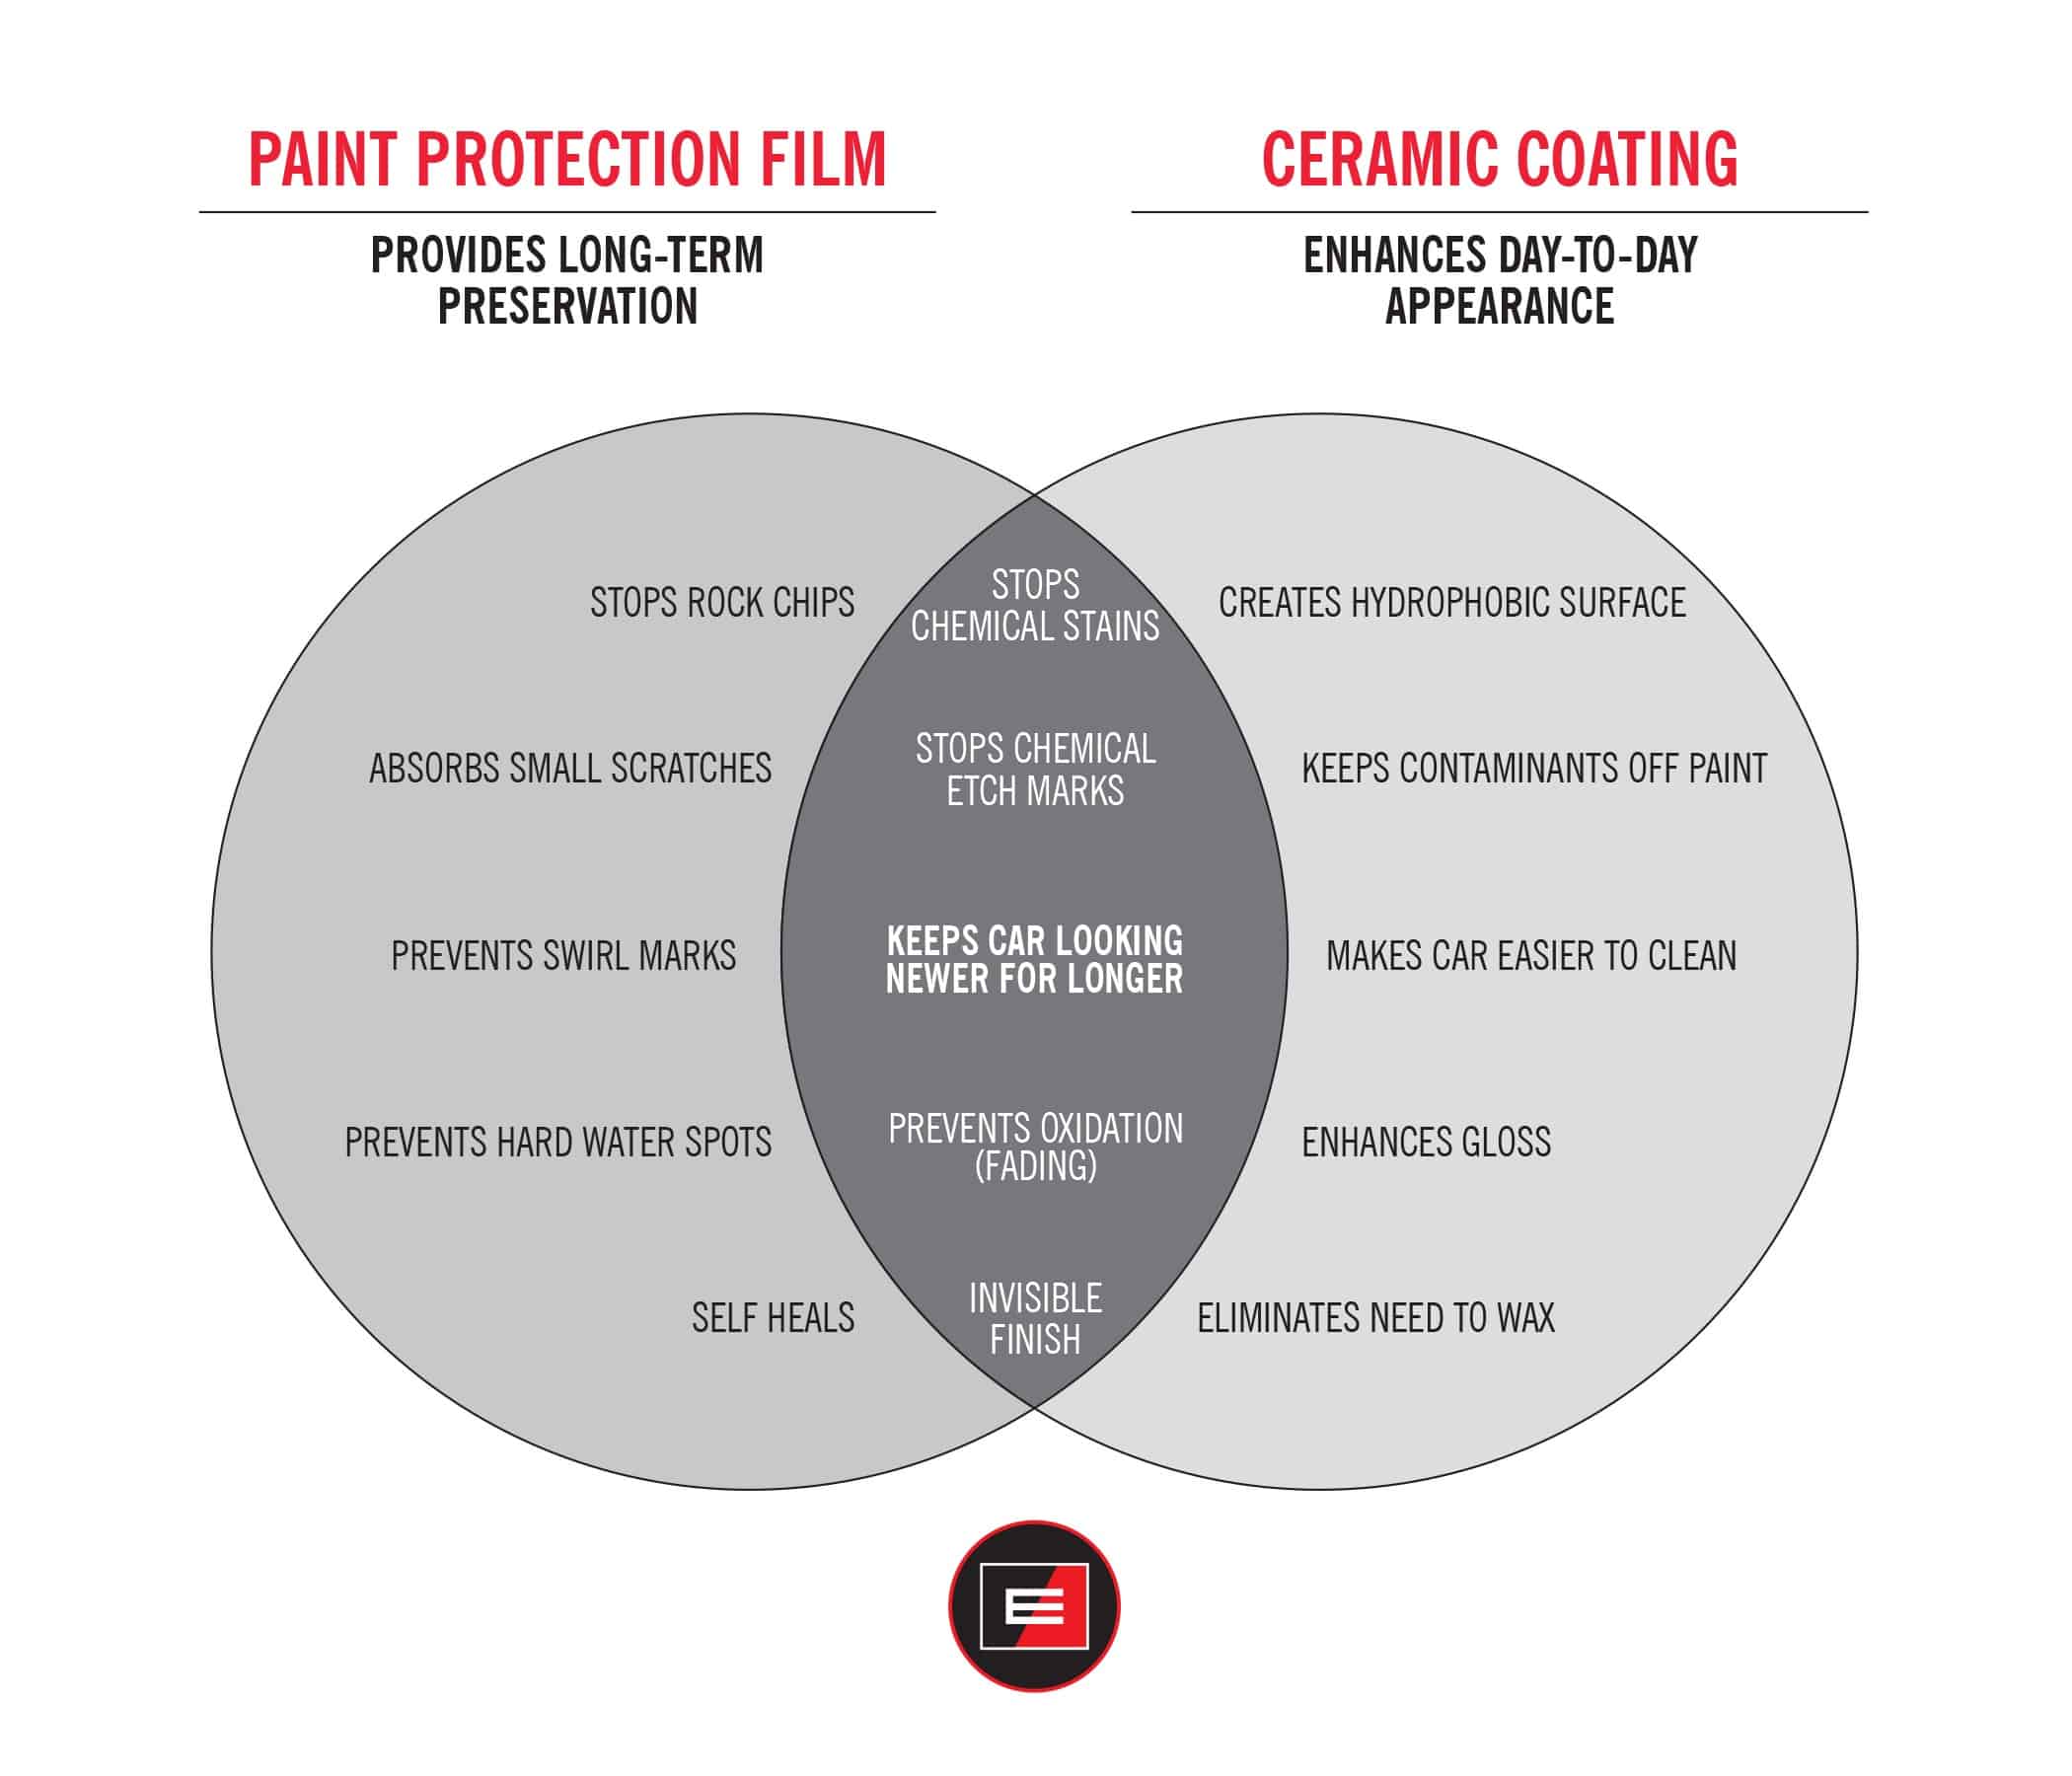 Ceramic Coat vs Wax: What Are the Differences?